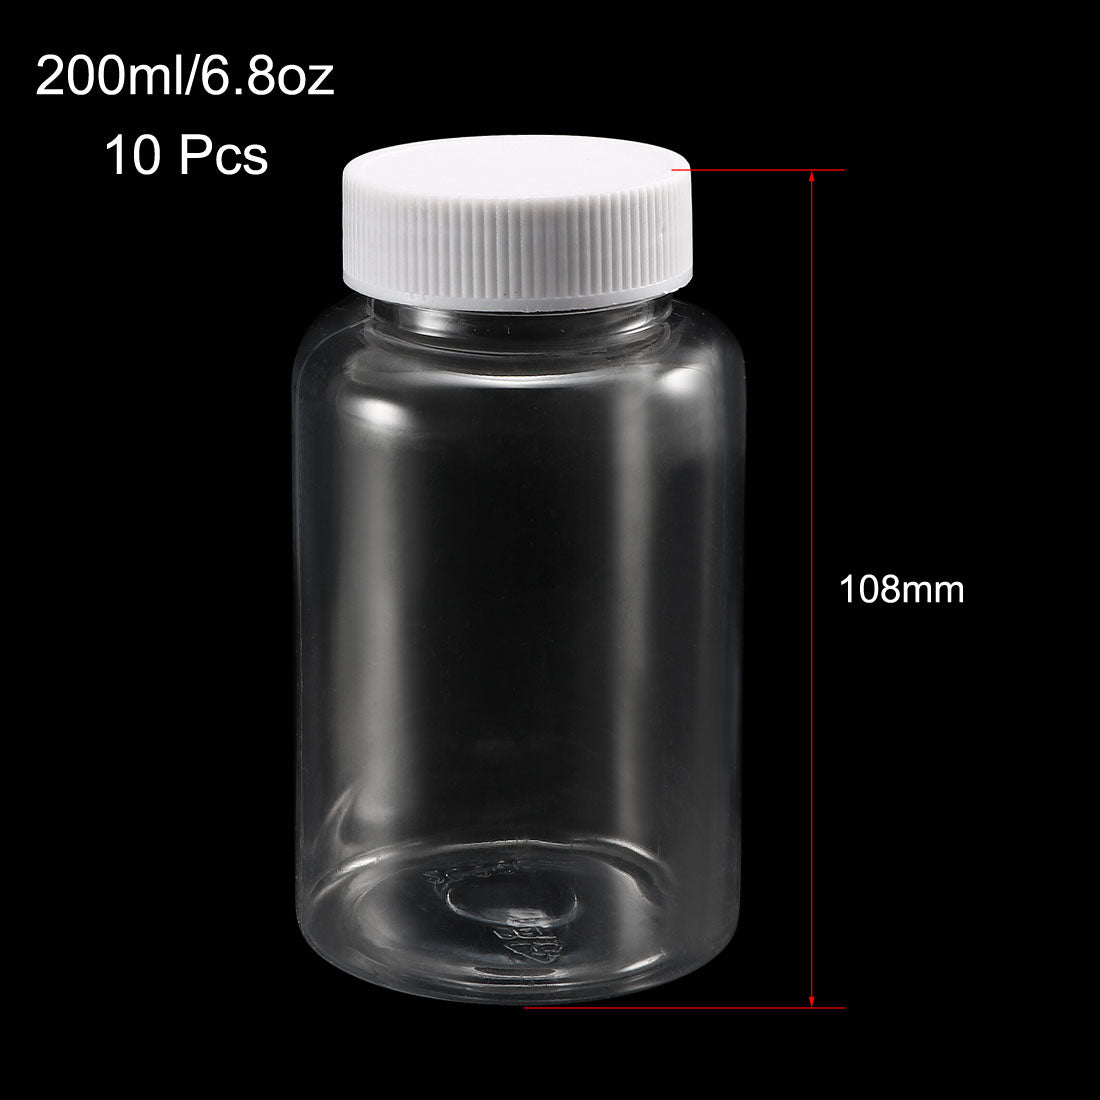 Uxcell Uxcell Plastic Lab Chemical Reagent Bottle 200ml/6.8oz Wide Mouth Sample Sealing Liquid Storage Container 10pcs